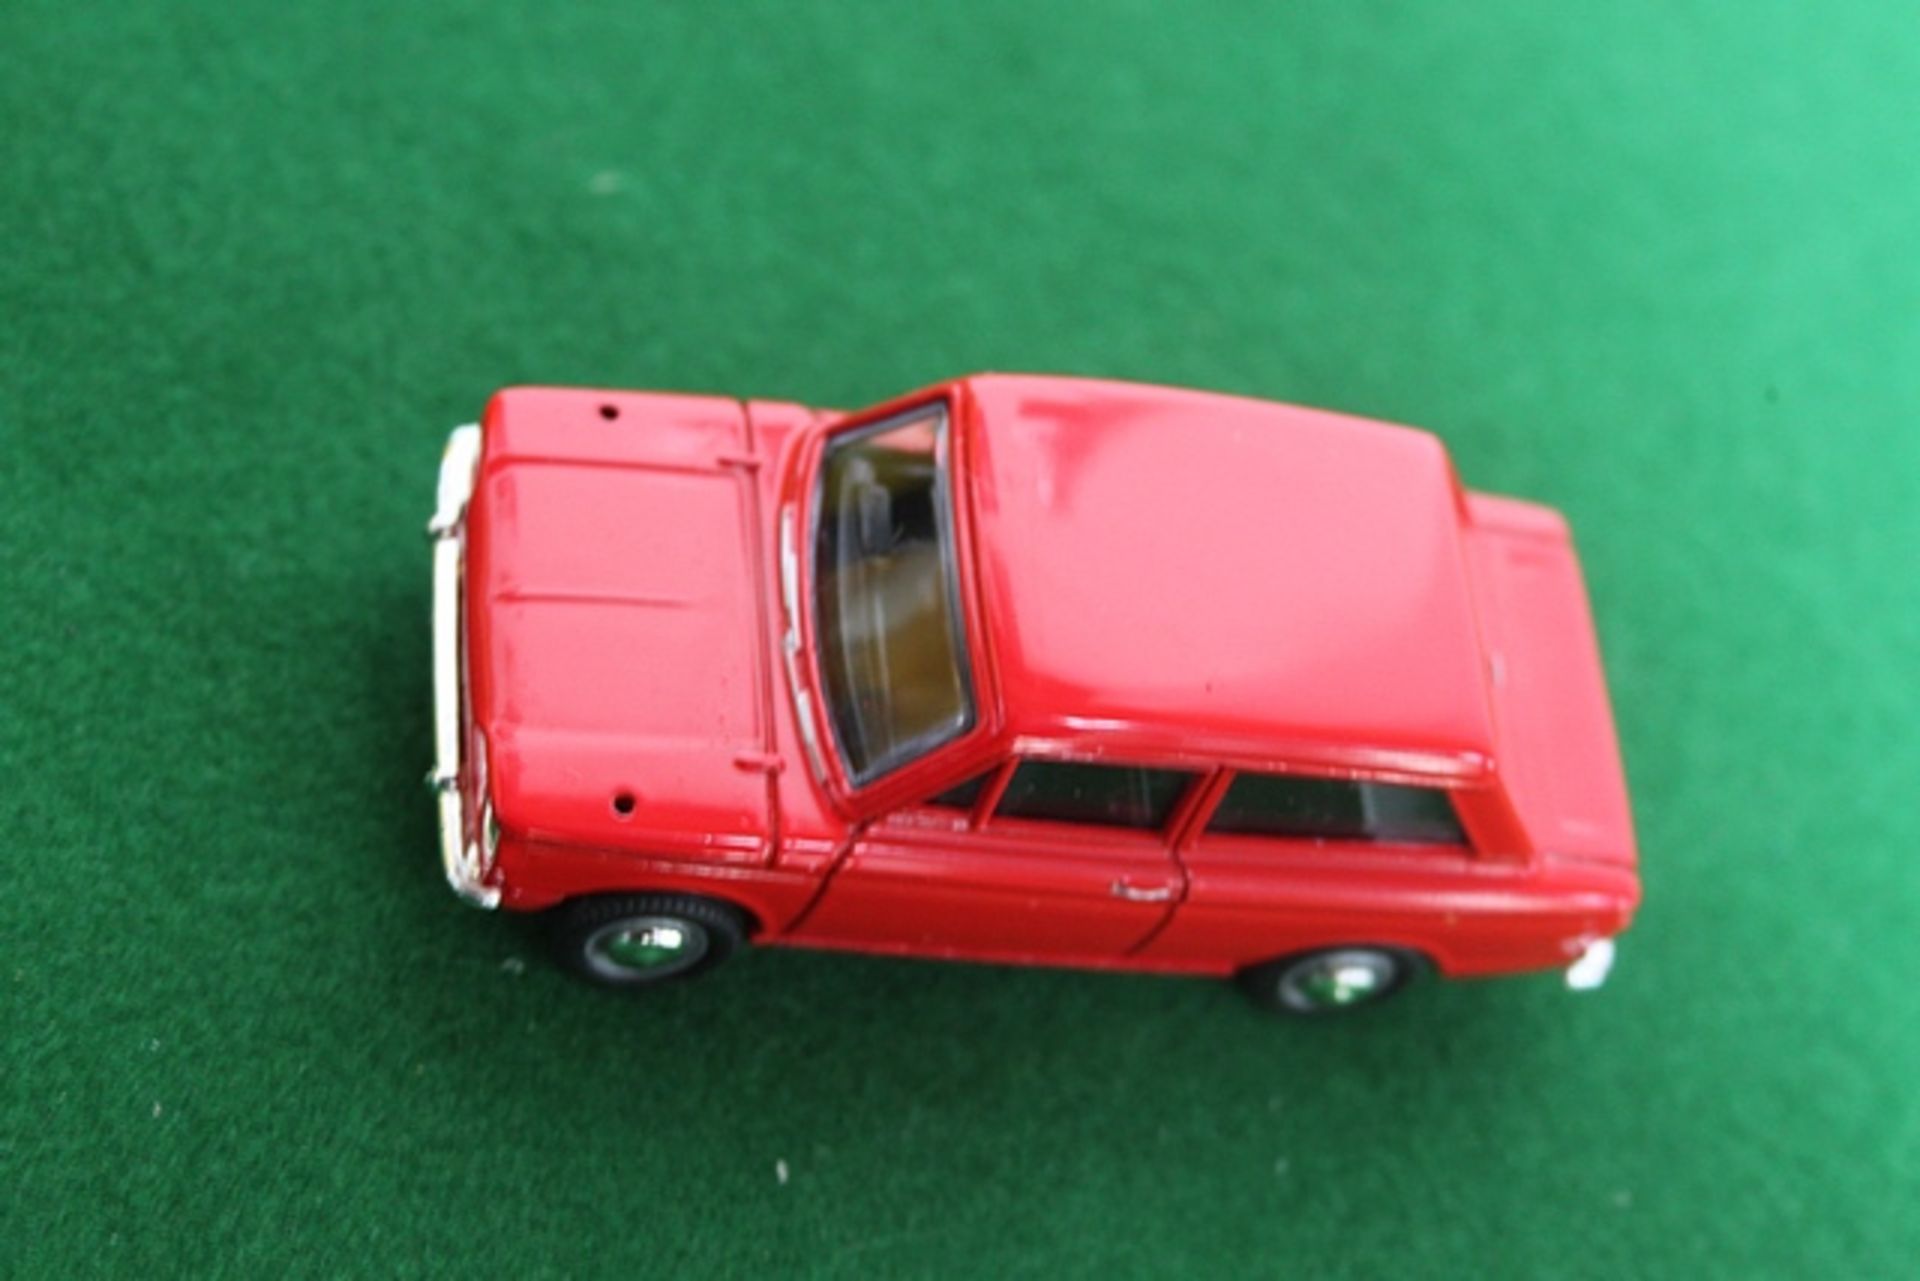 Vanguards # VA26000 1950s To 1960s Classic Popular Saloon Cars Selection Diecast Hillman Imp In - Image 2 of 3